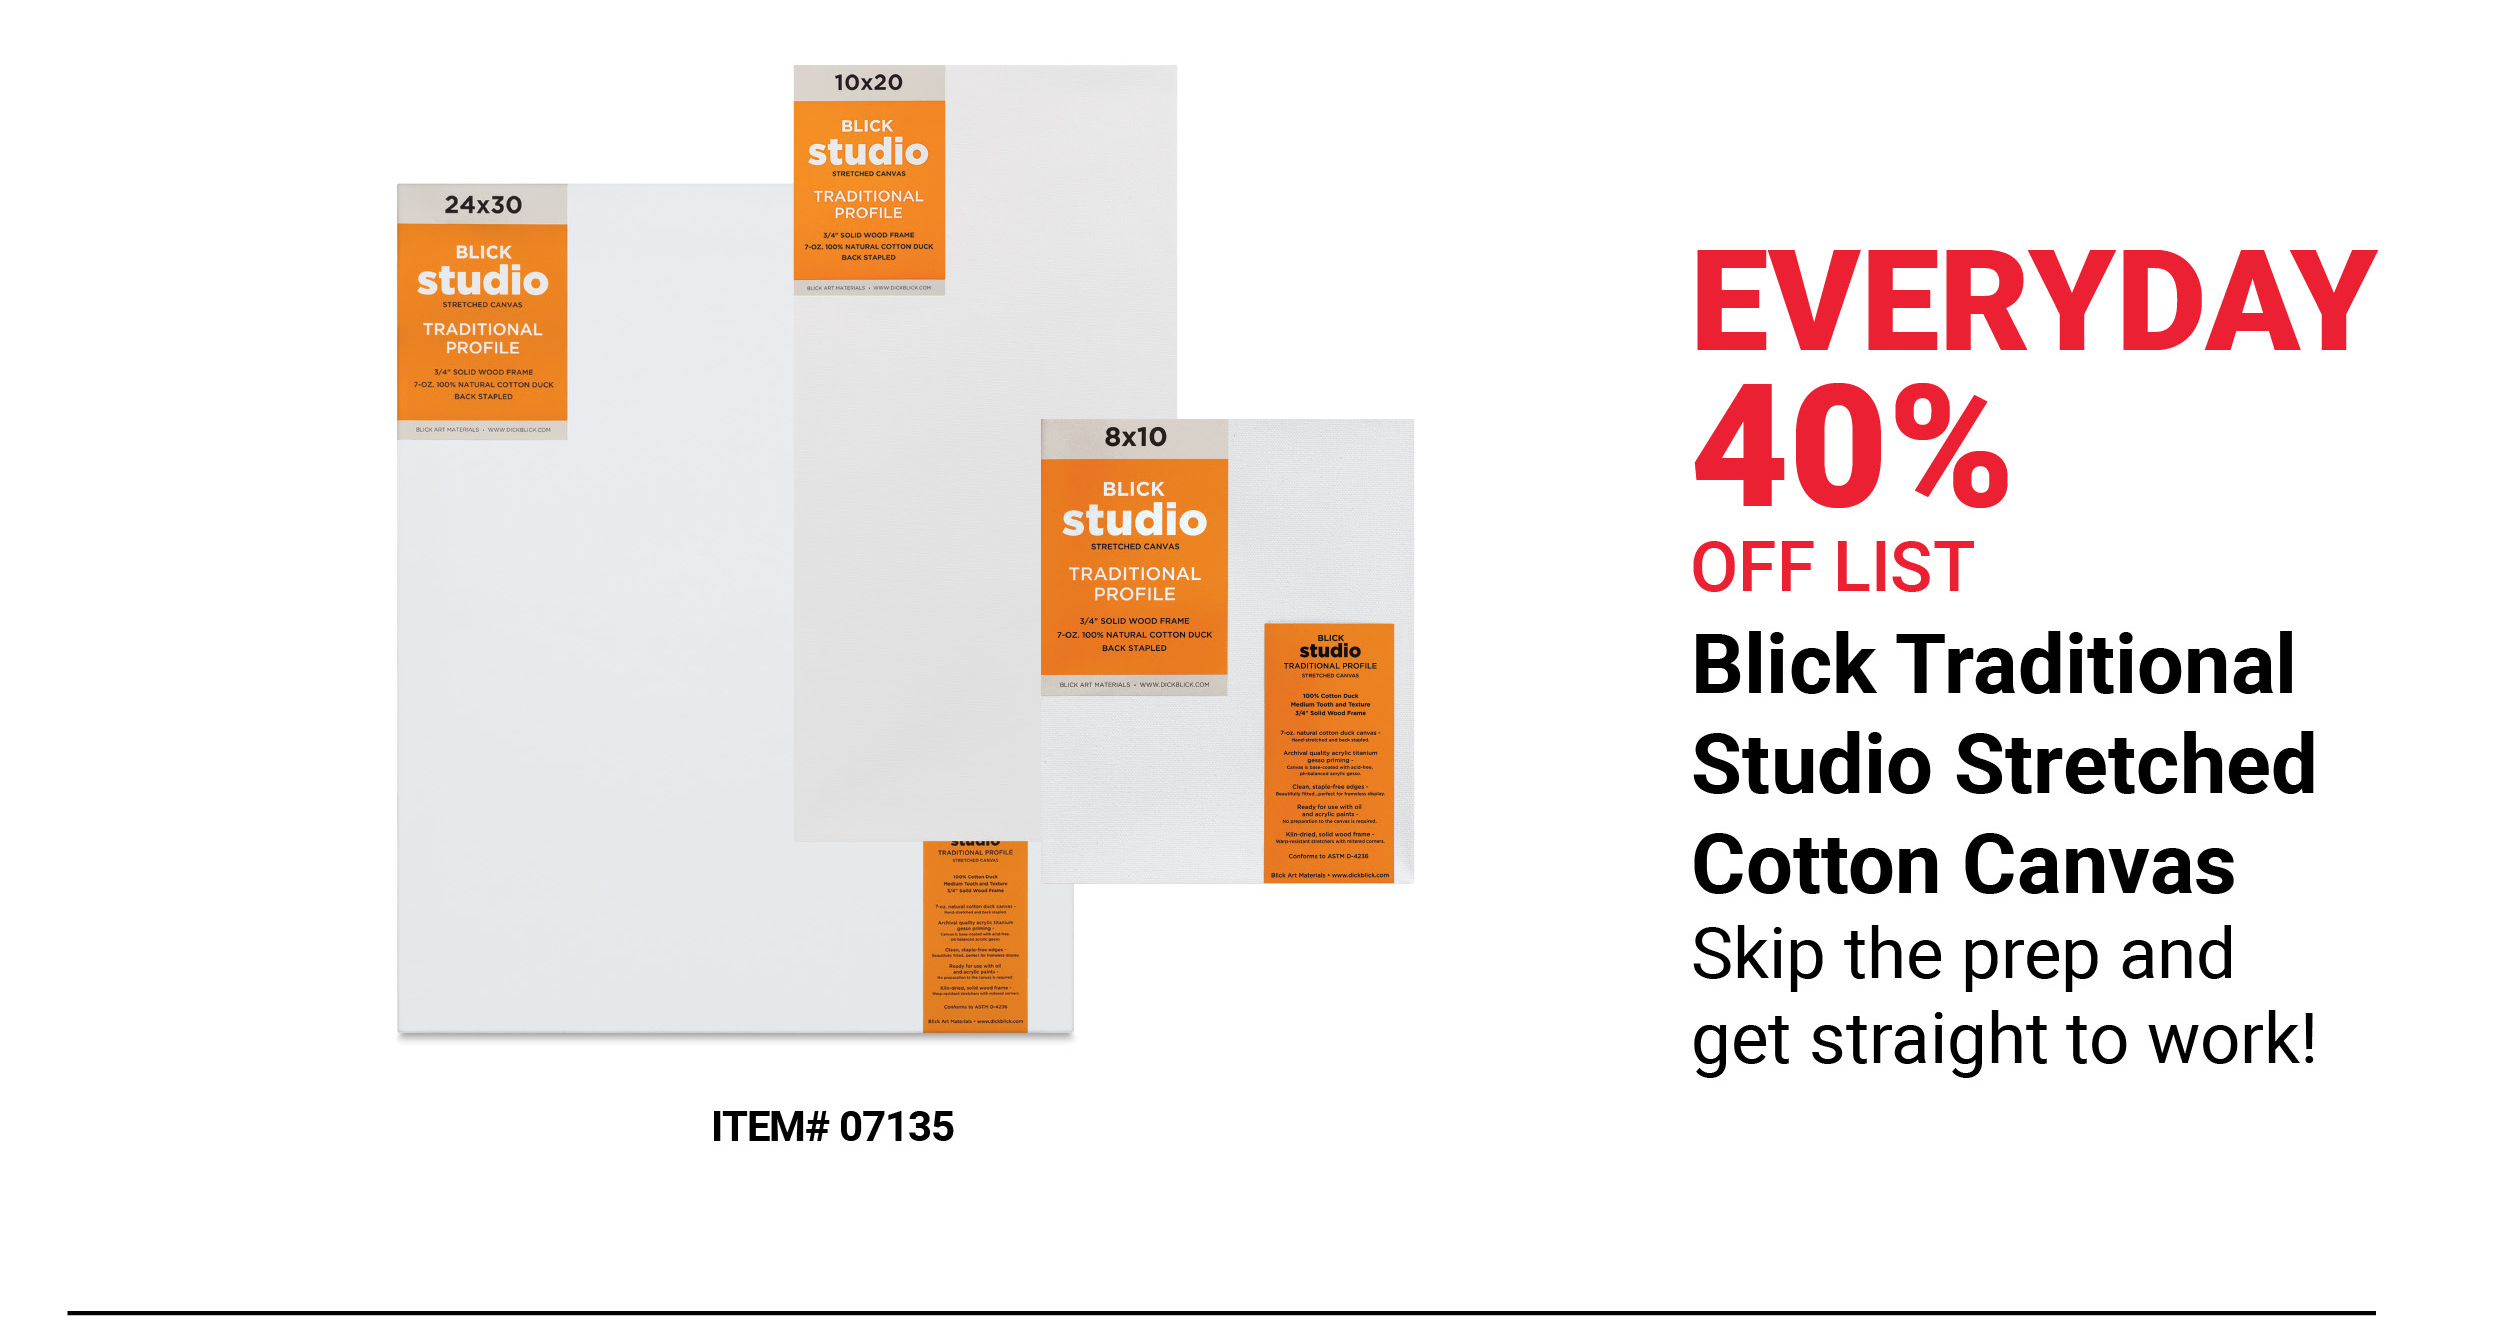 Blick Traditional Studio Stretched Cotton Canvas Everyday 40% Off List